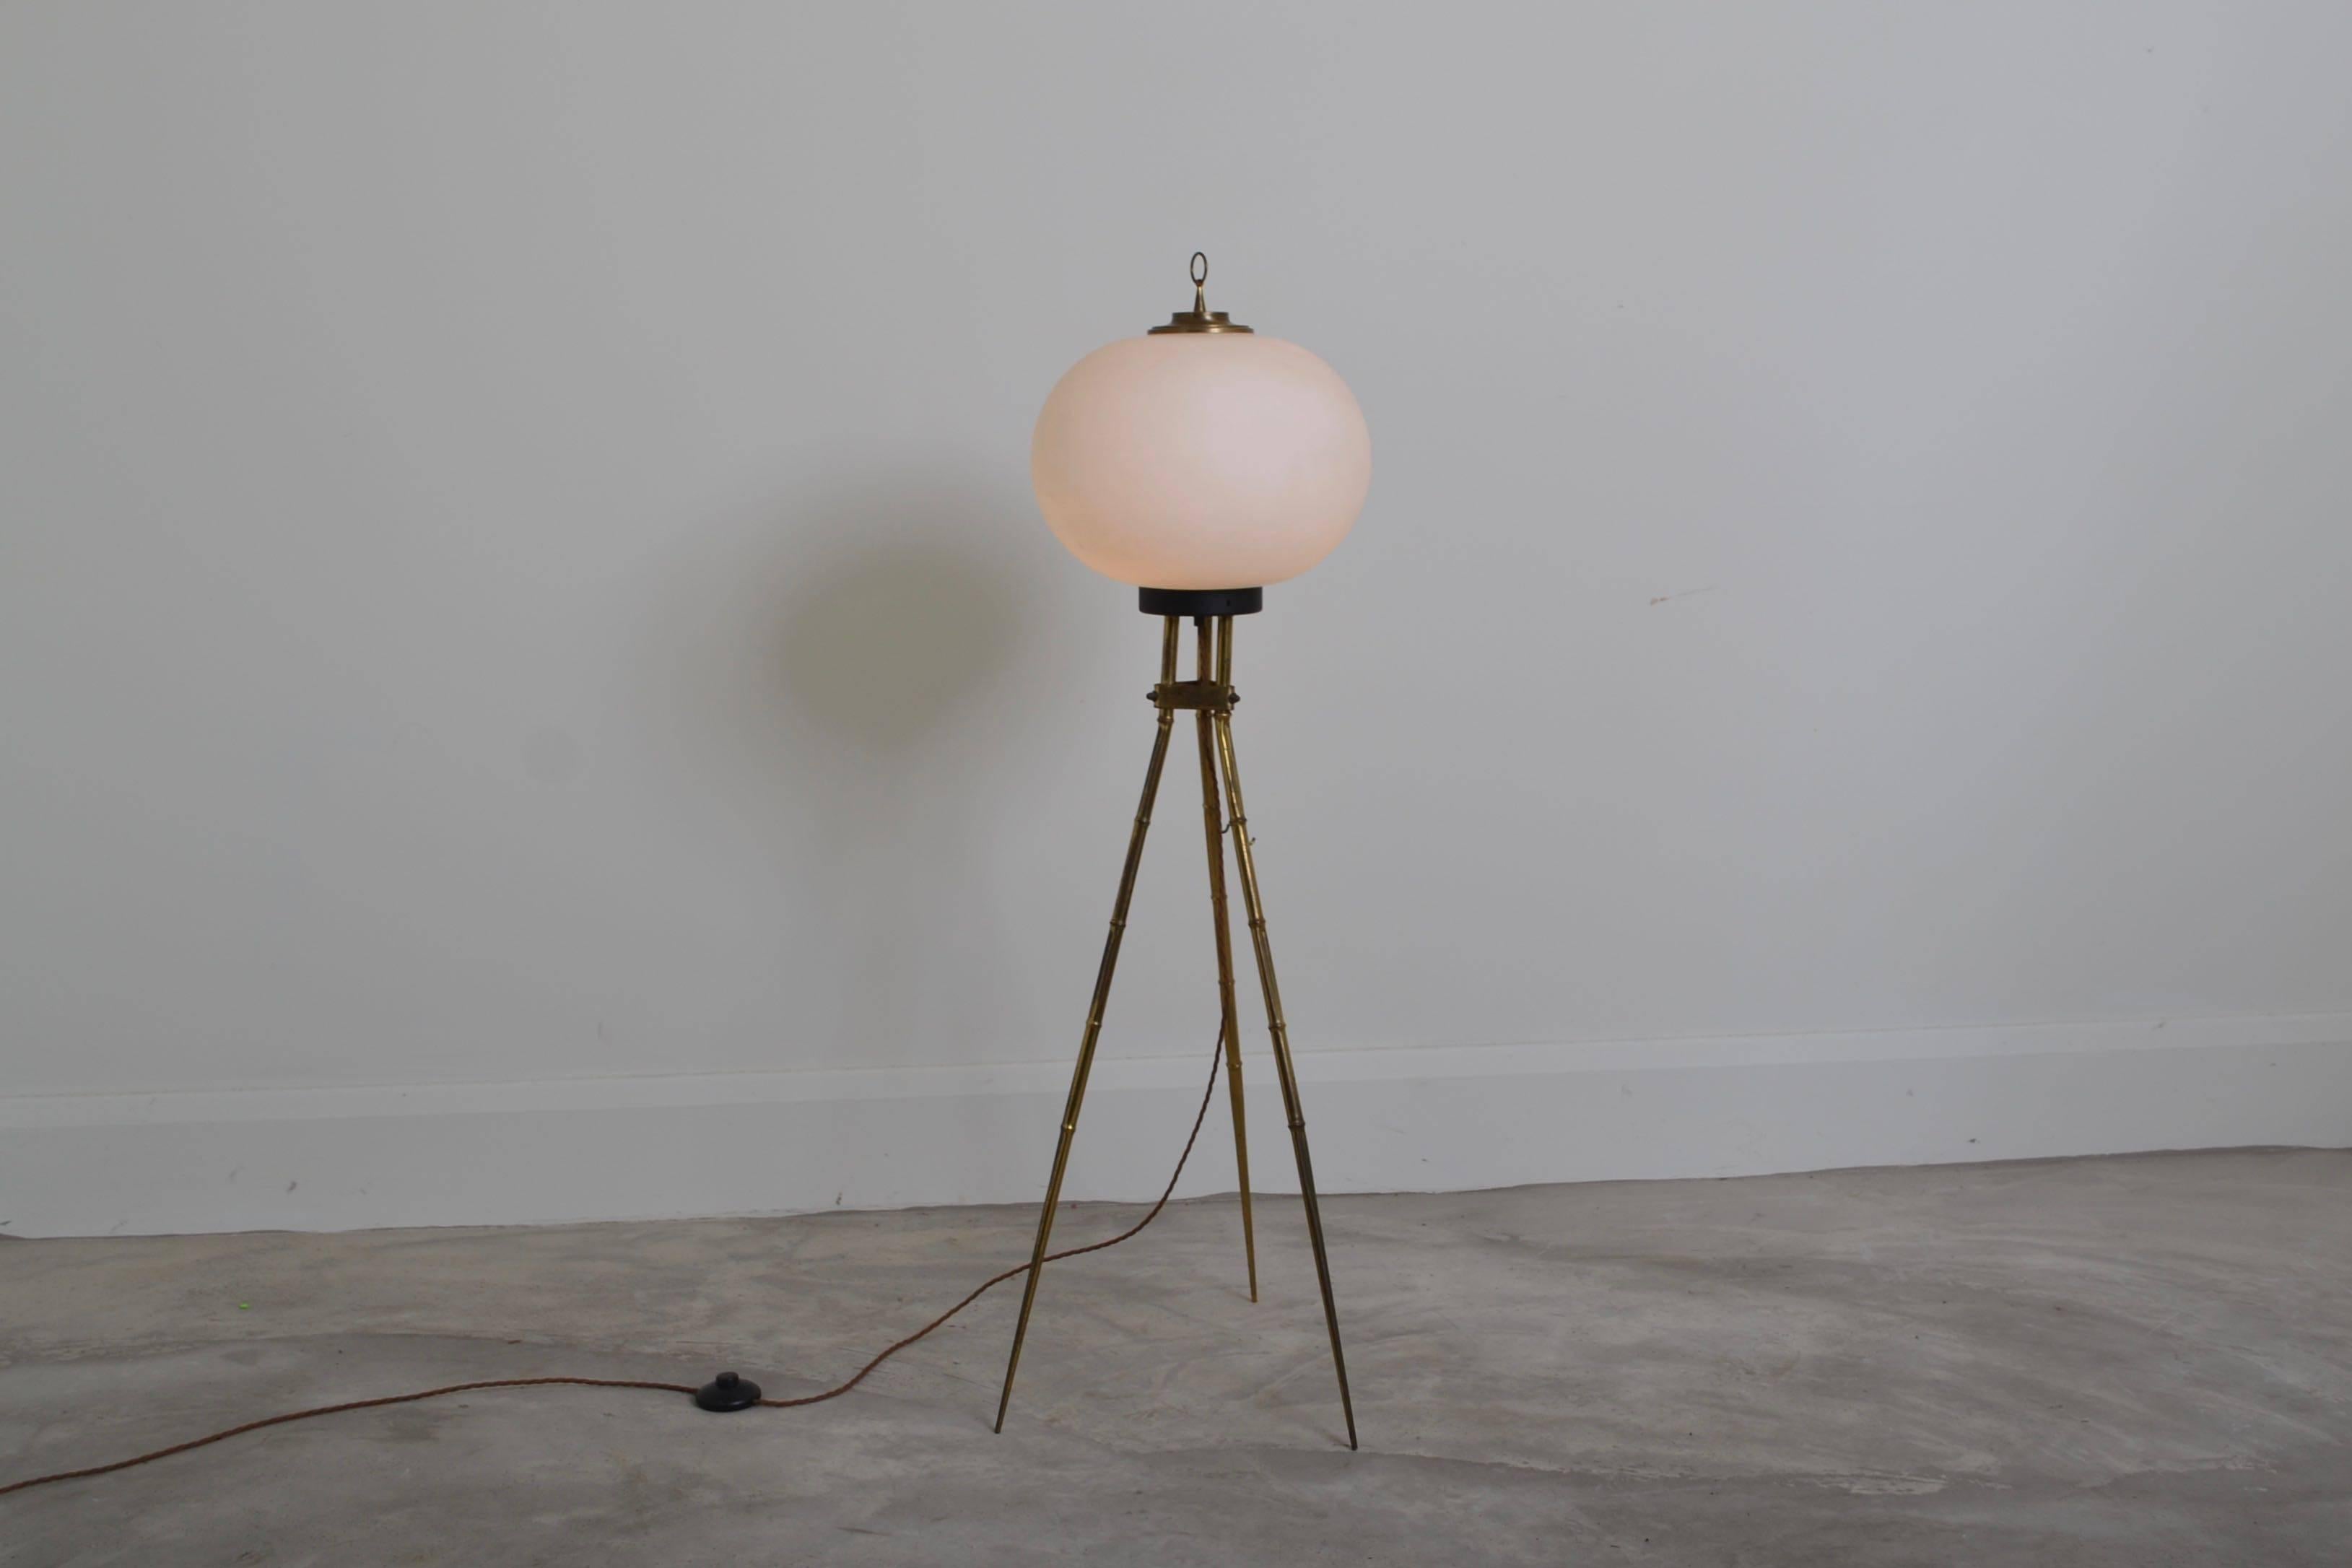 Unusual tripod floor lamp with oplaine glass shade.
The lacquered brass legs have a faux bamboo design.
Useful lamp to place by a sofa or chair.